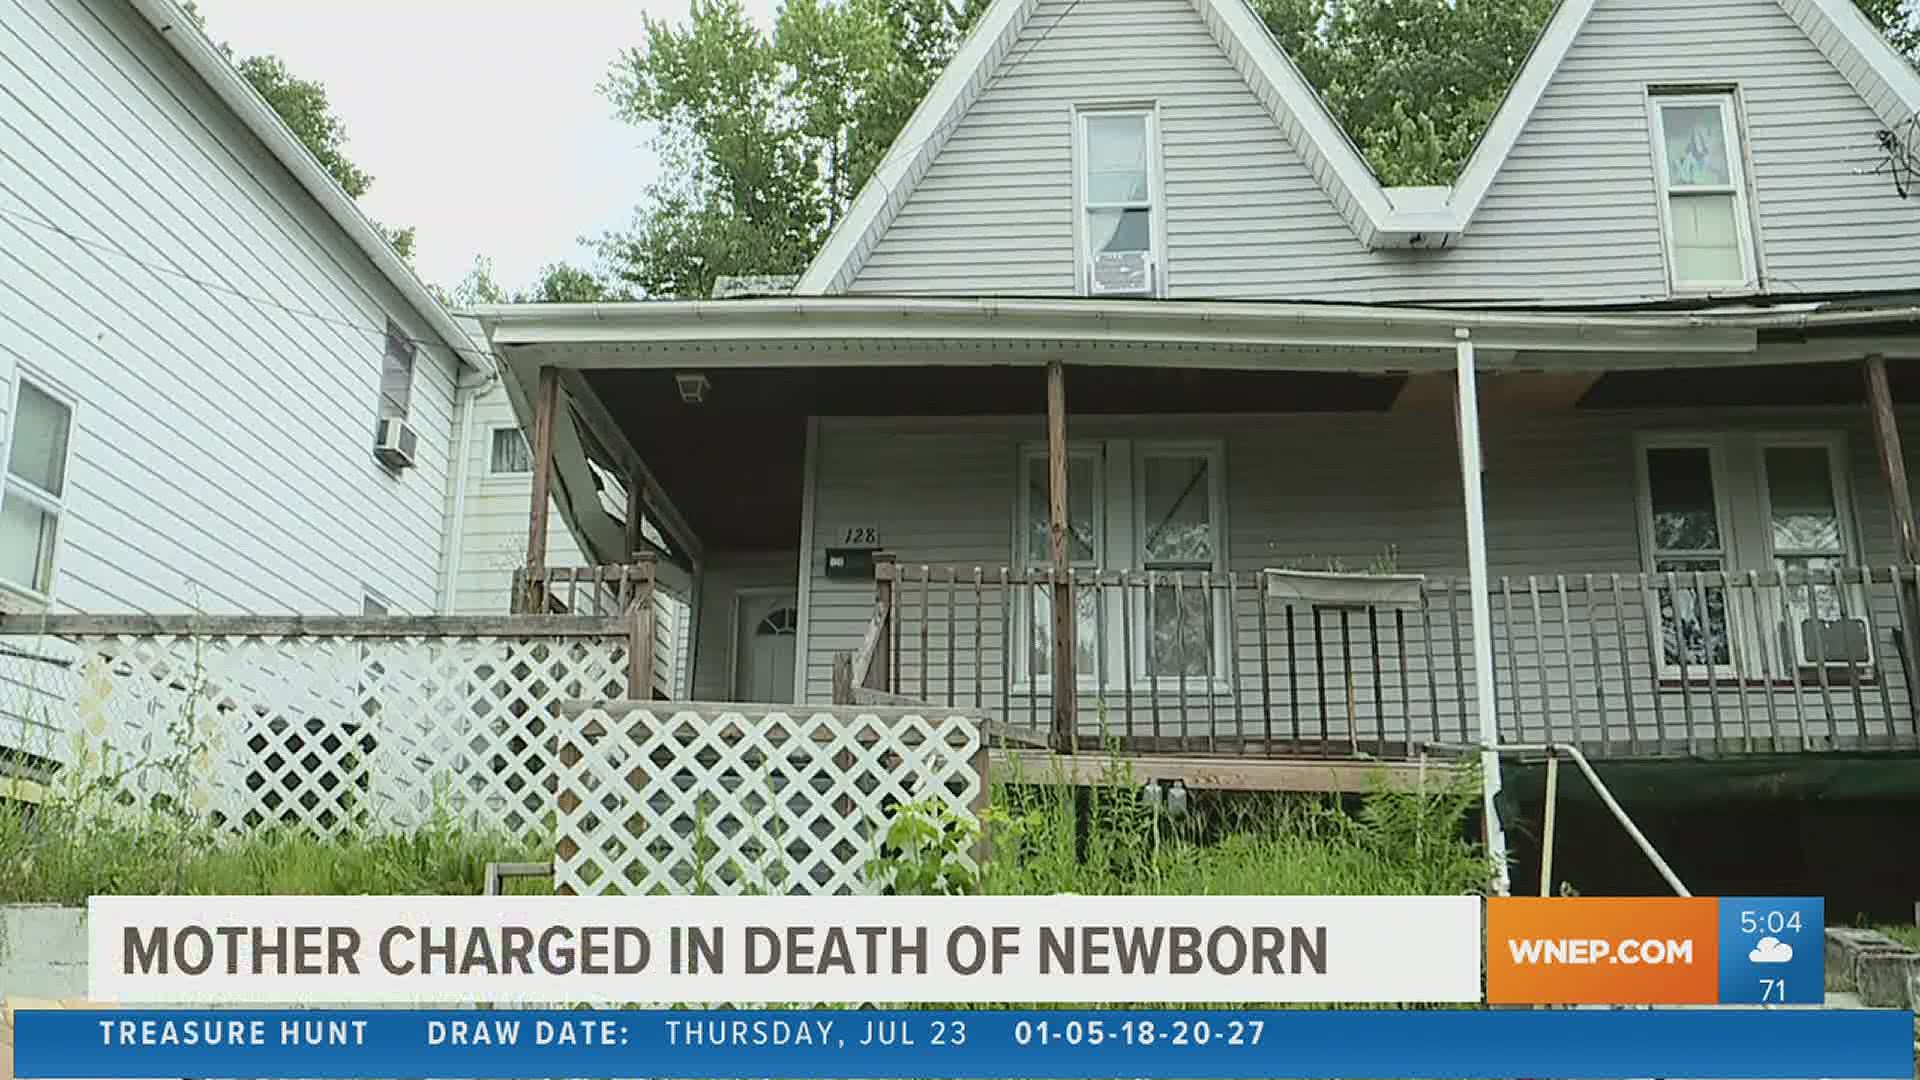 Police say the woman was on drugs the night of the infant's death.